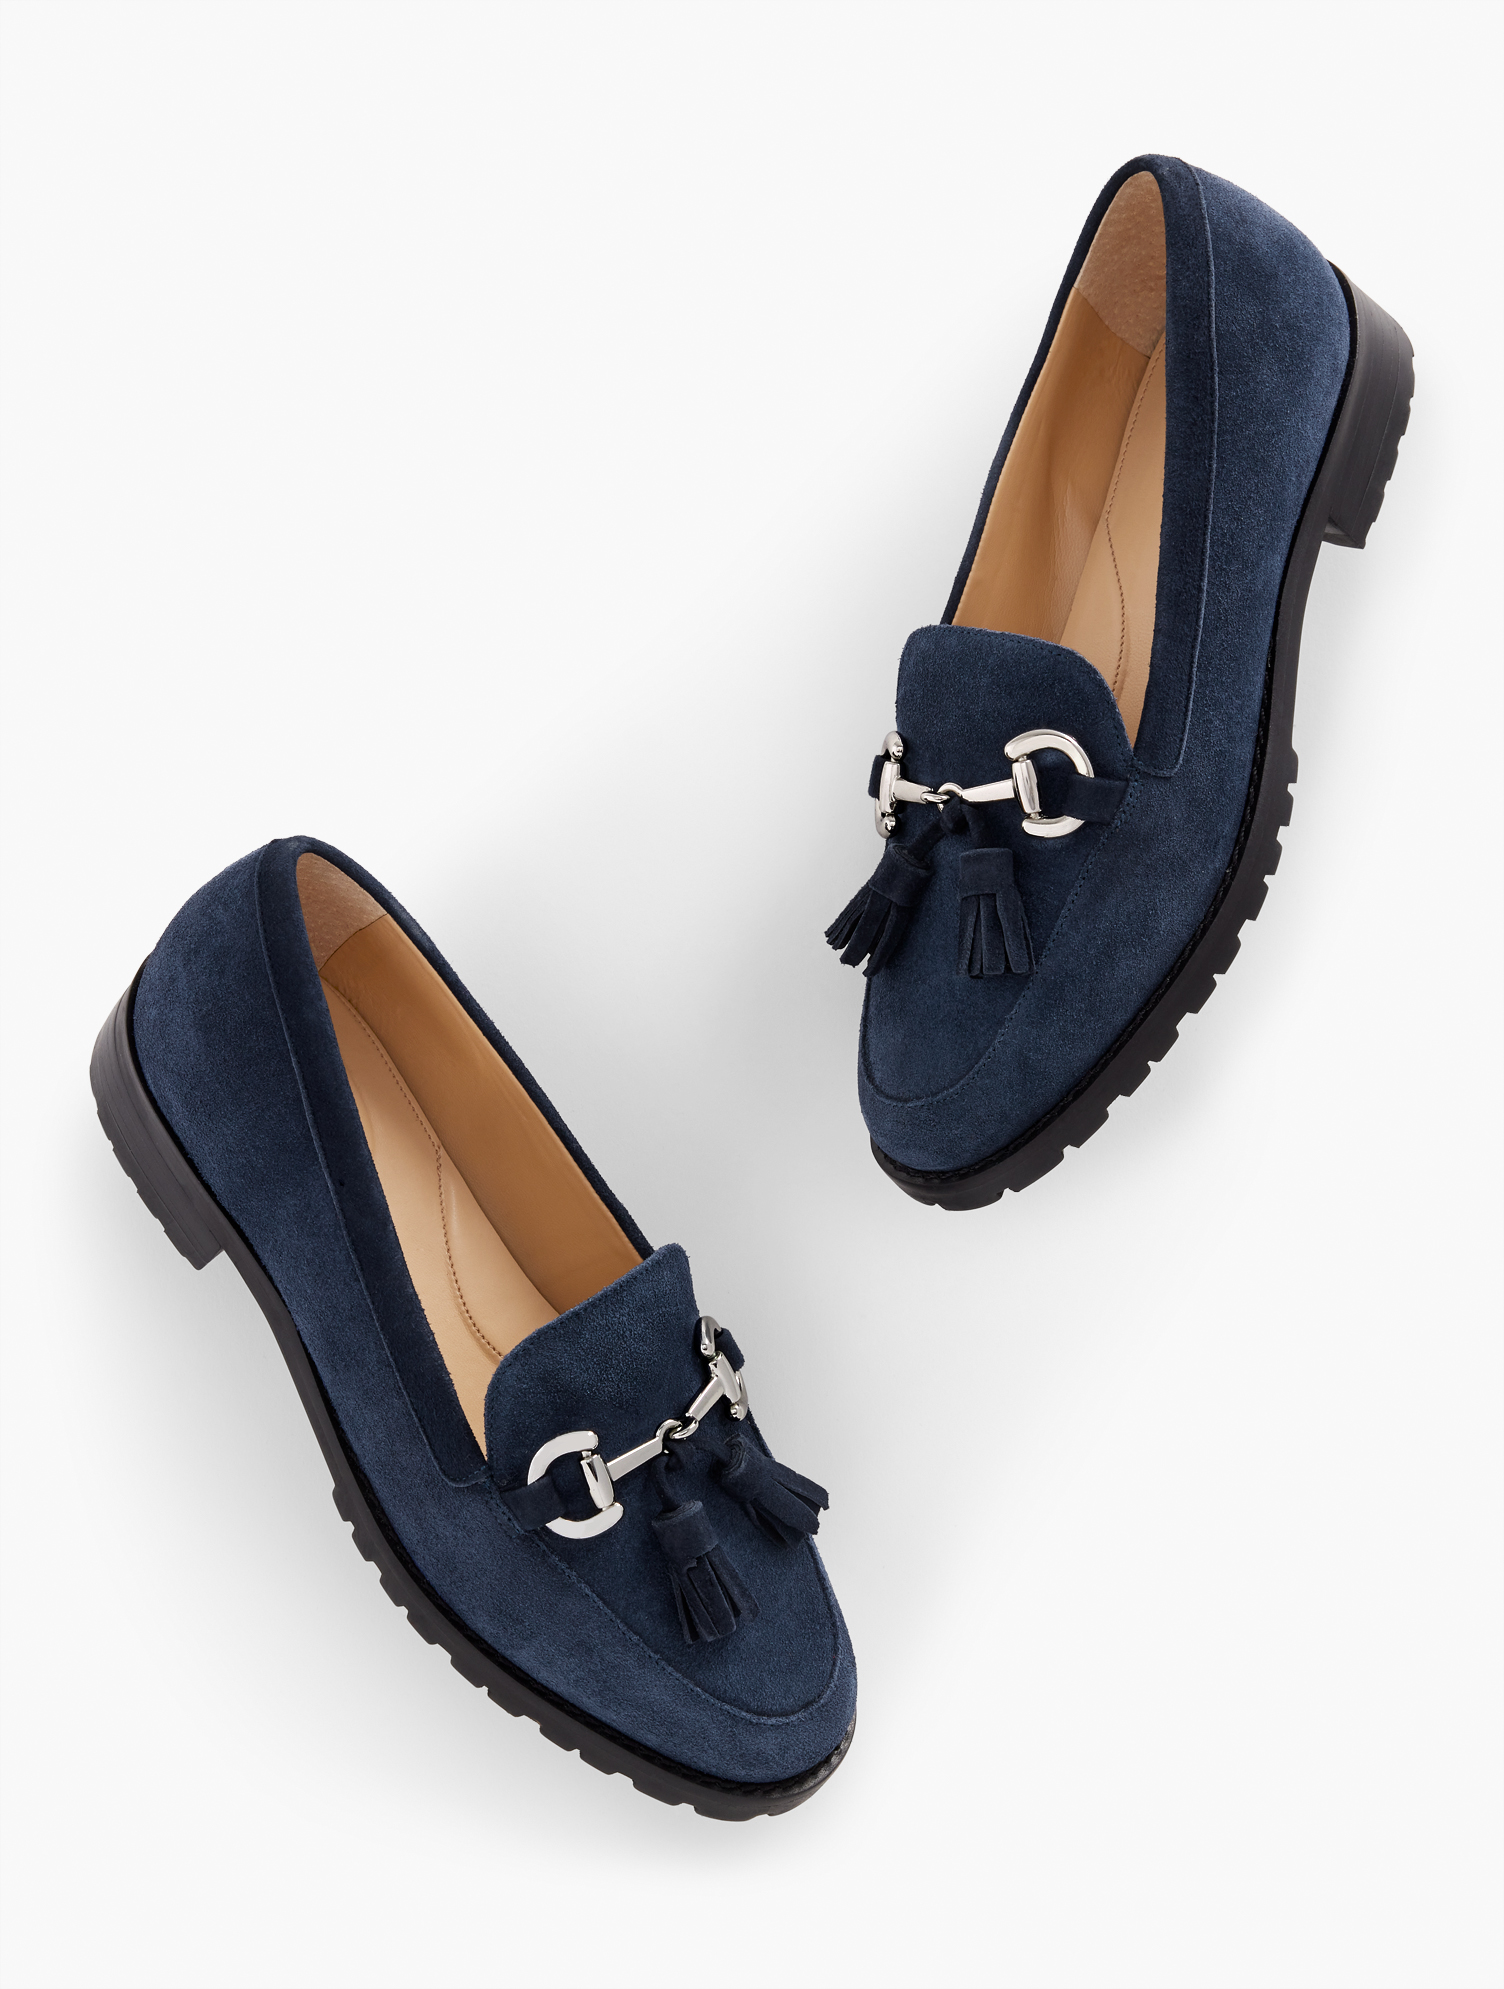 Talbots Cassidy Tassel Loafers - Suede - Blue - 10m